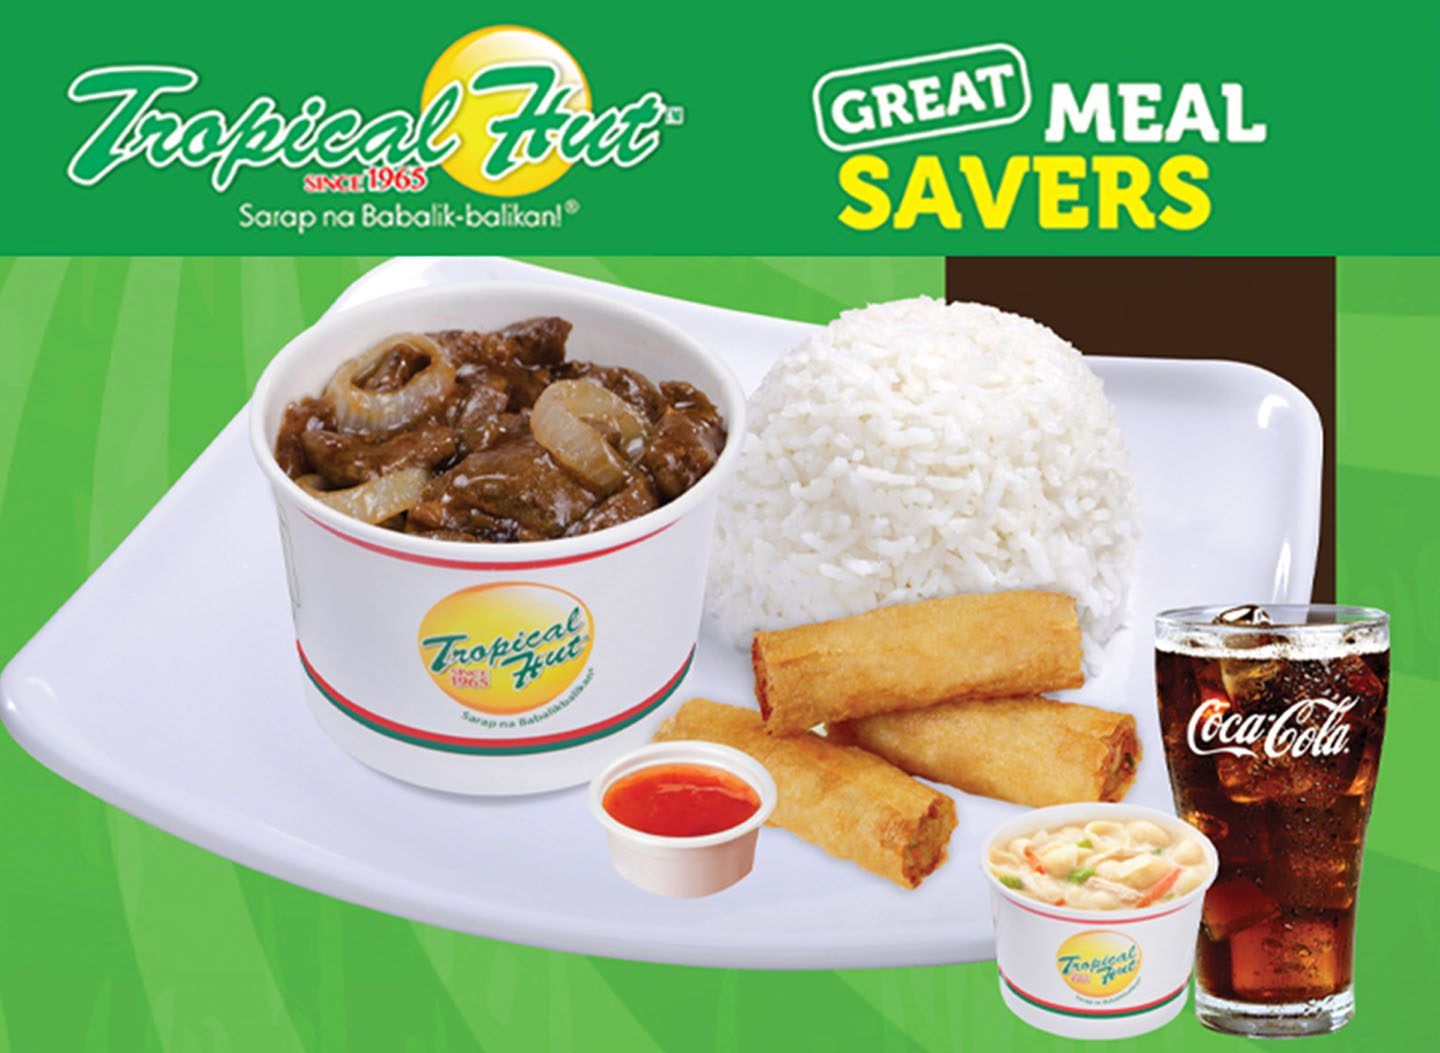 Great Meal Savers 4